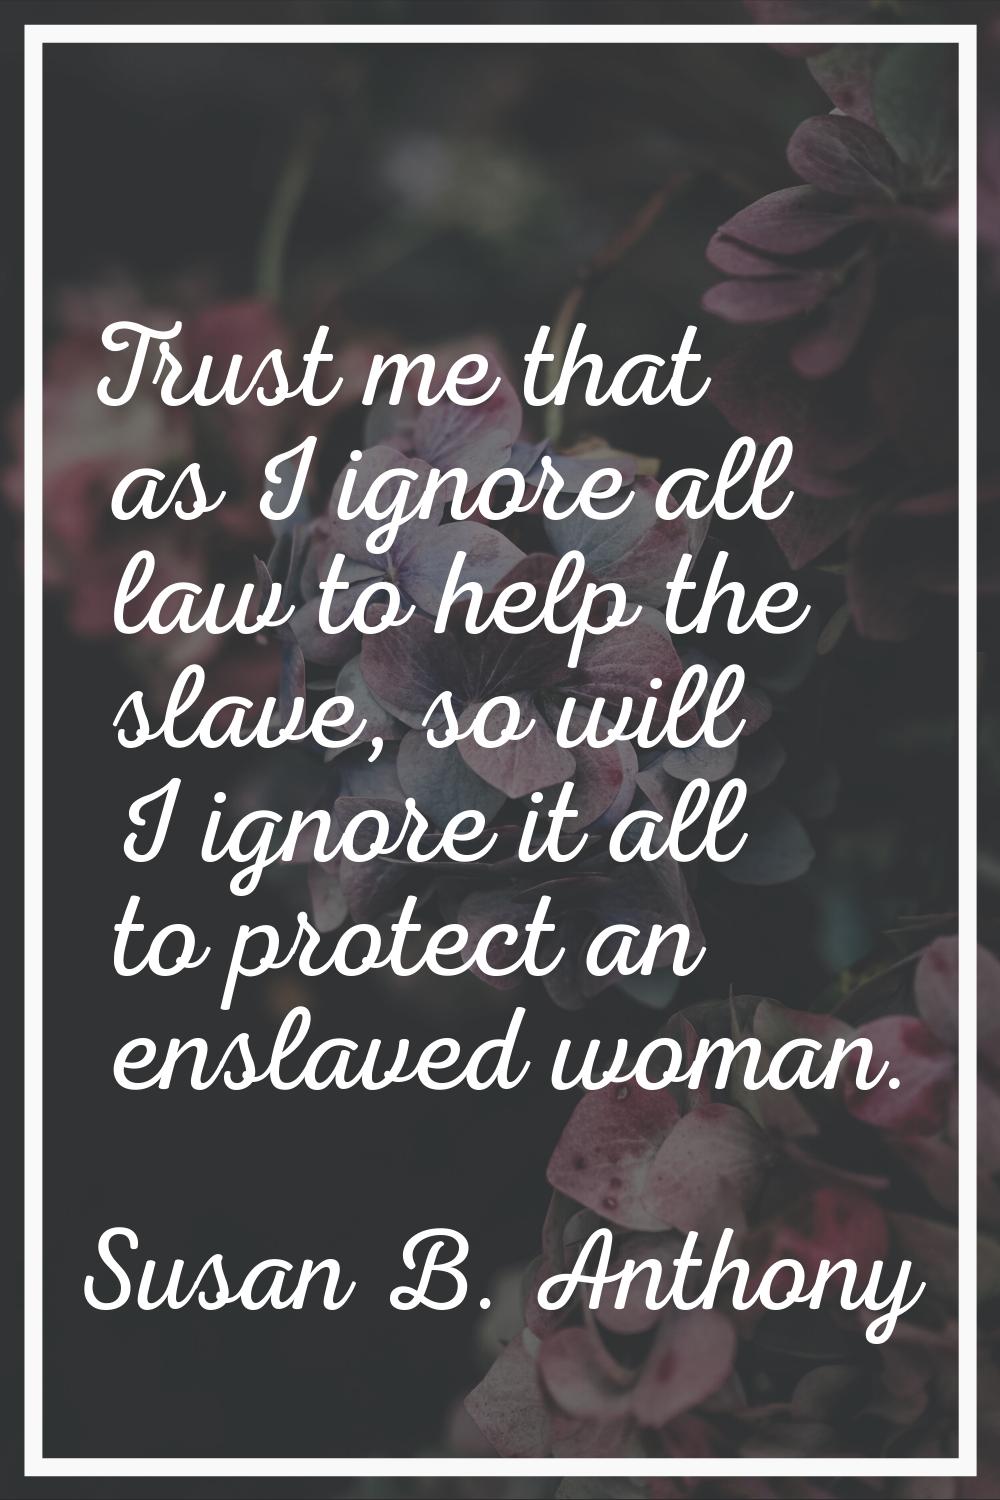 Trust me that as I ignore all law to help the slave, so will I ignore it all to protect an enslaved